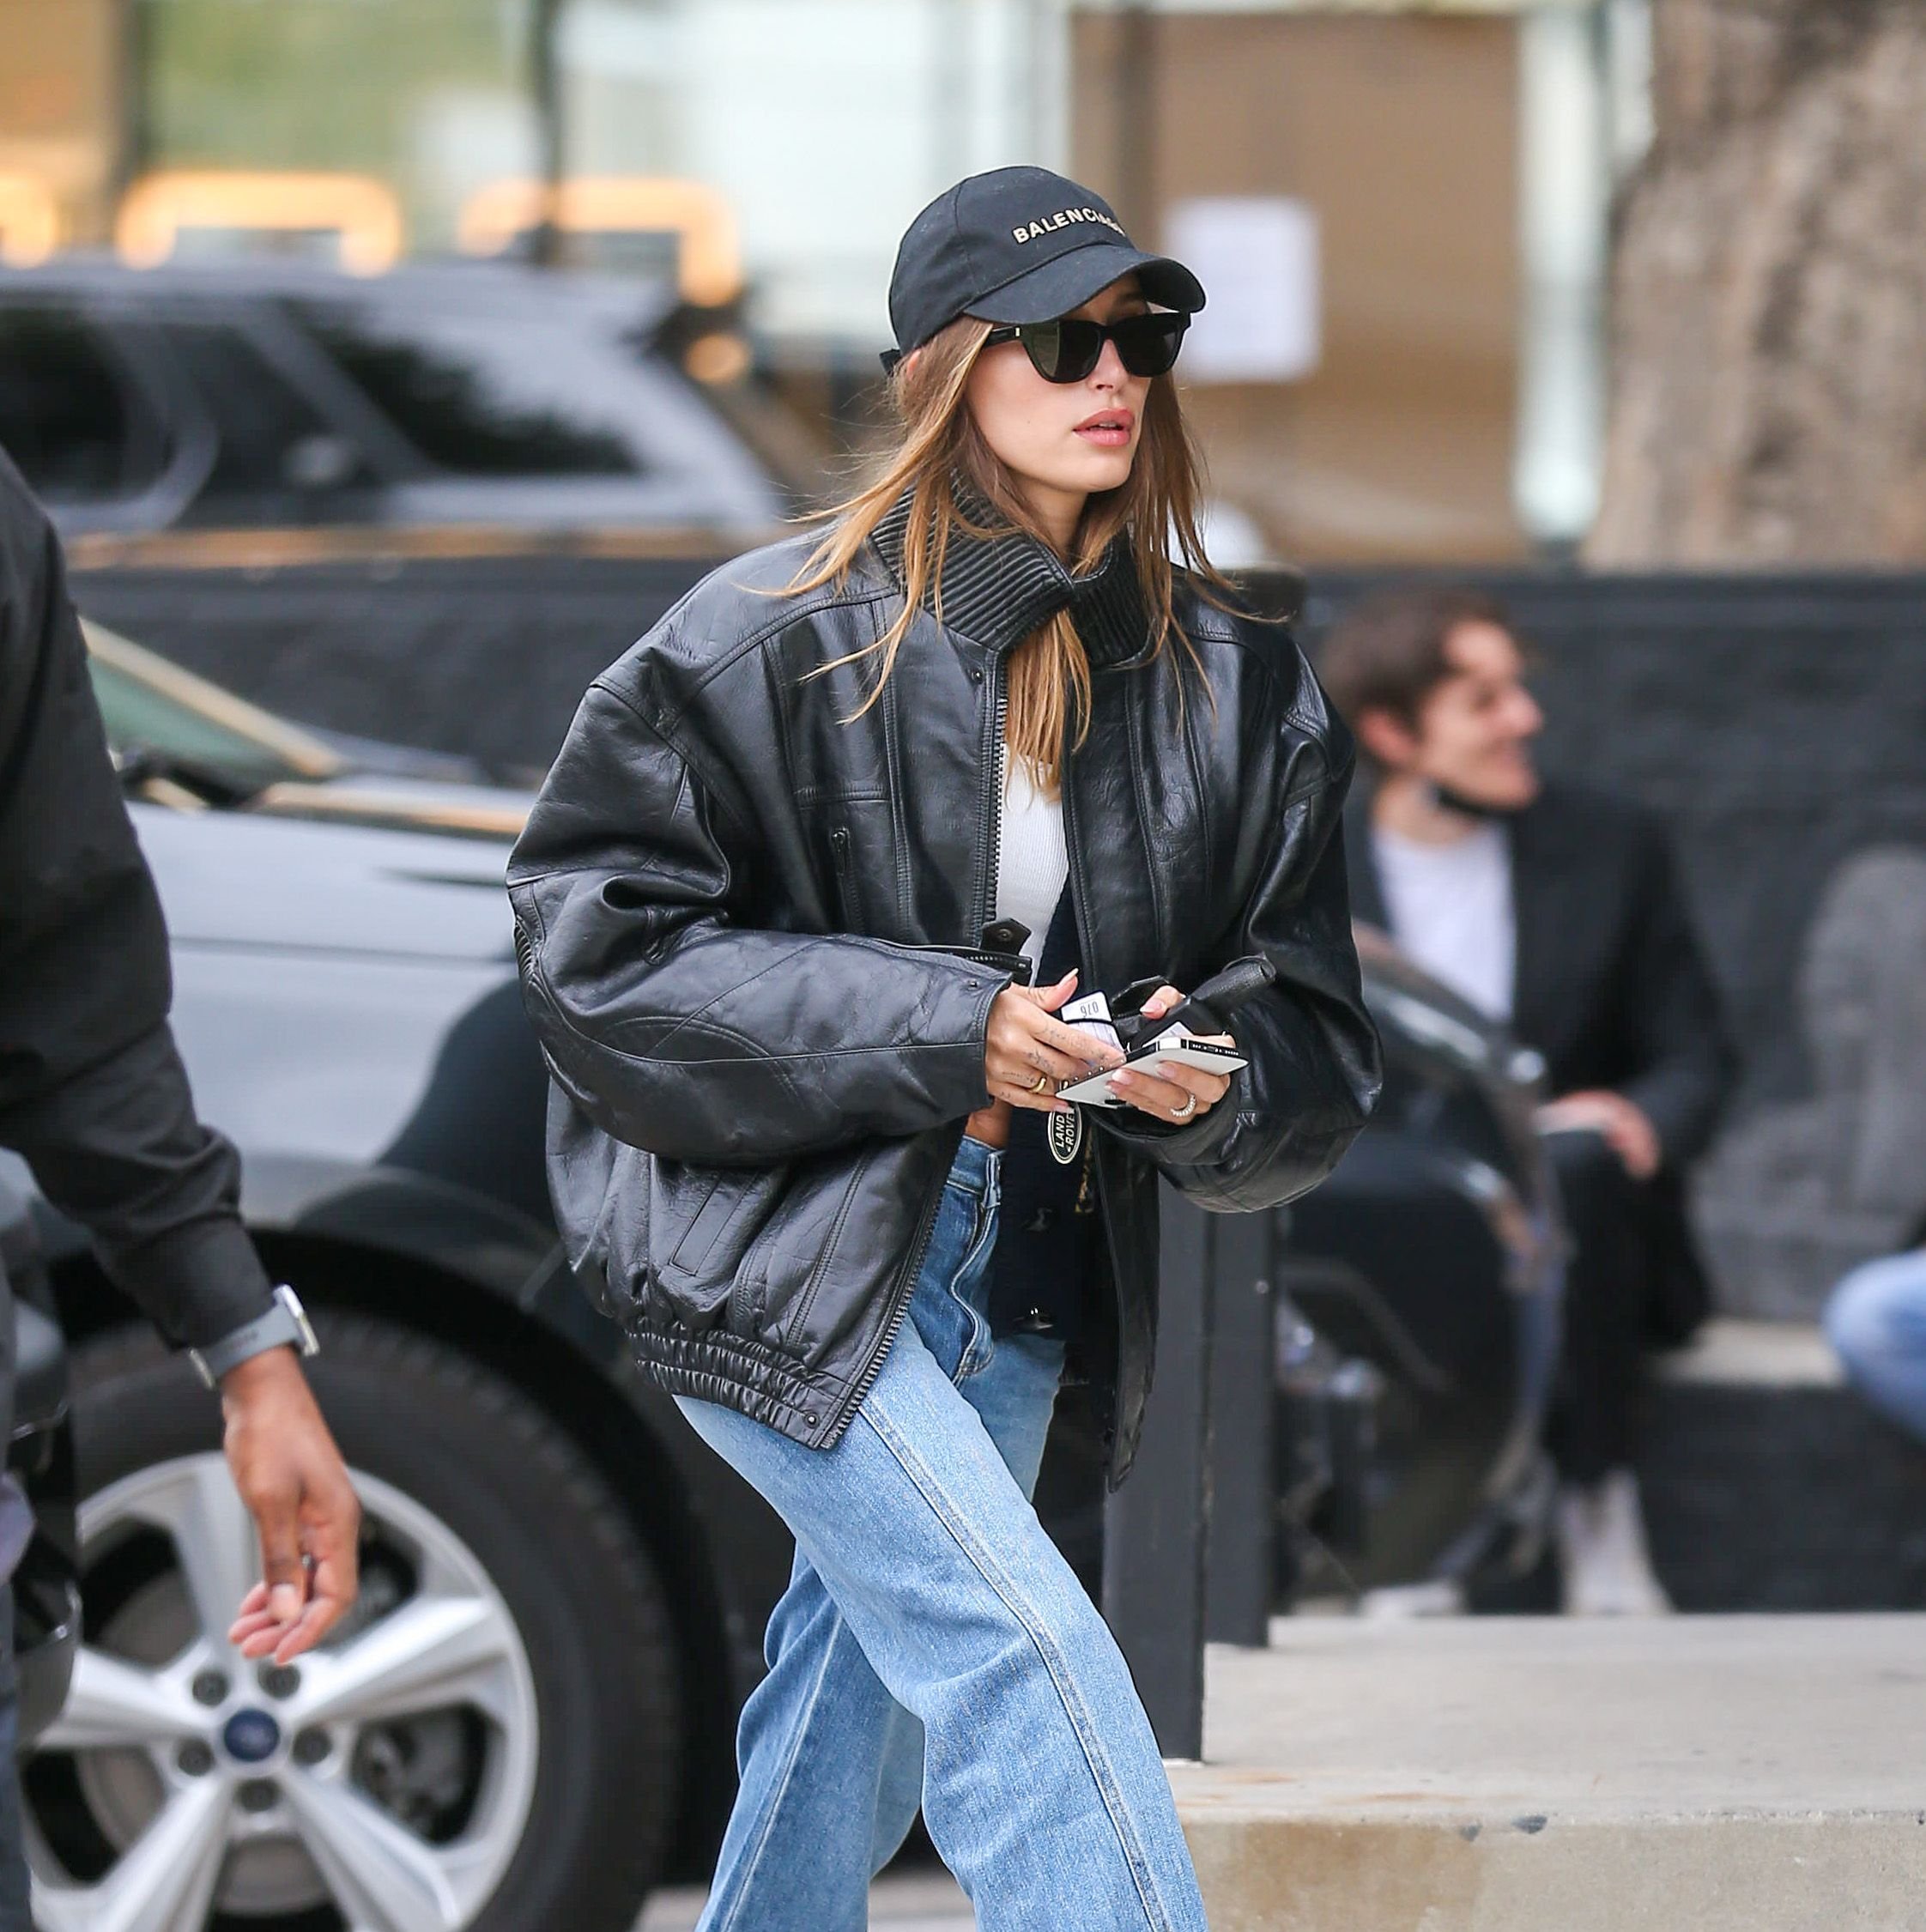 Hailey Bieber Is Effortlessly Chic in a Slouchy Holiday Shopping Look.jpg